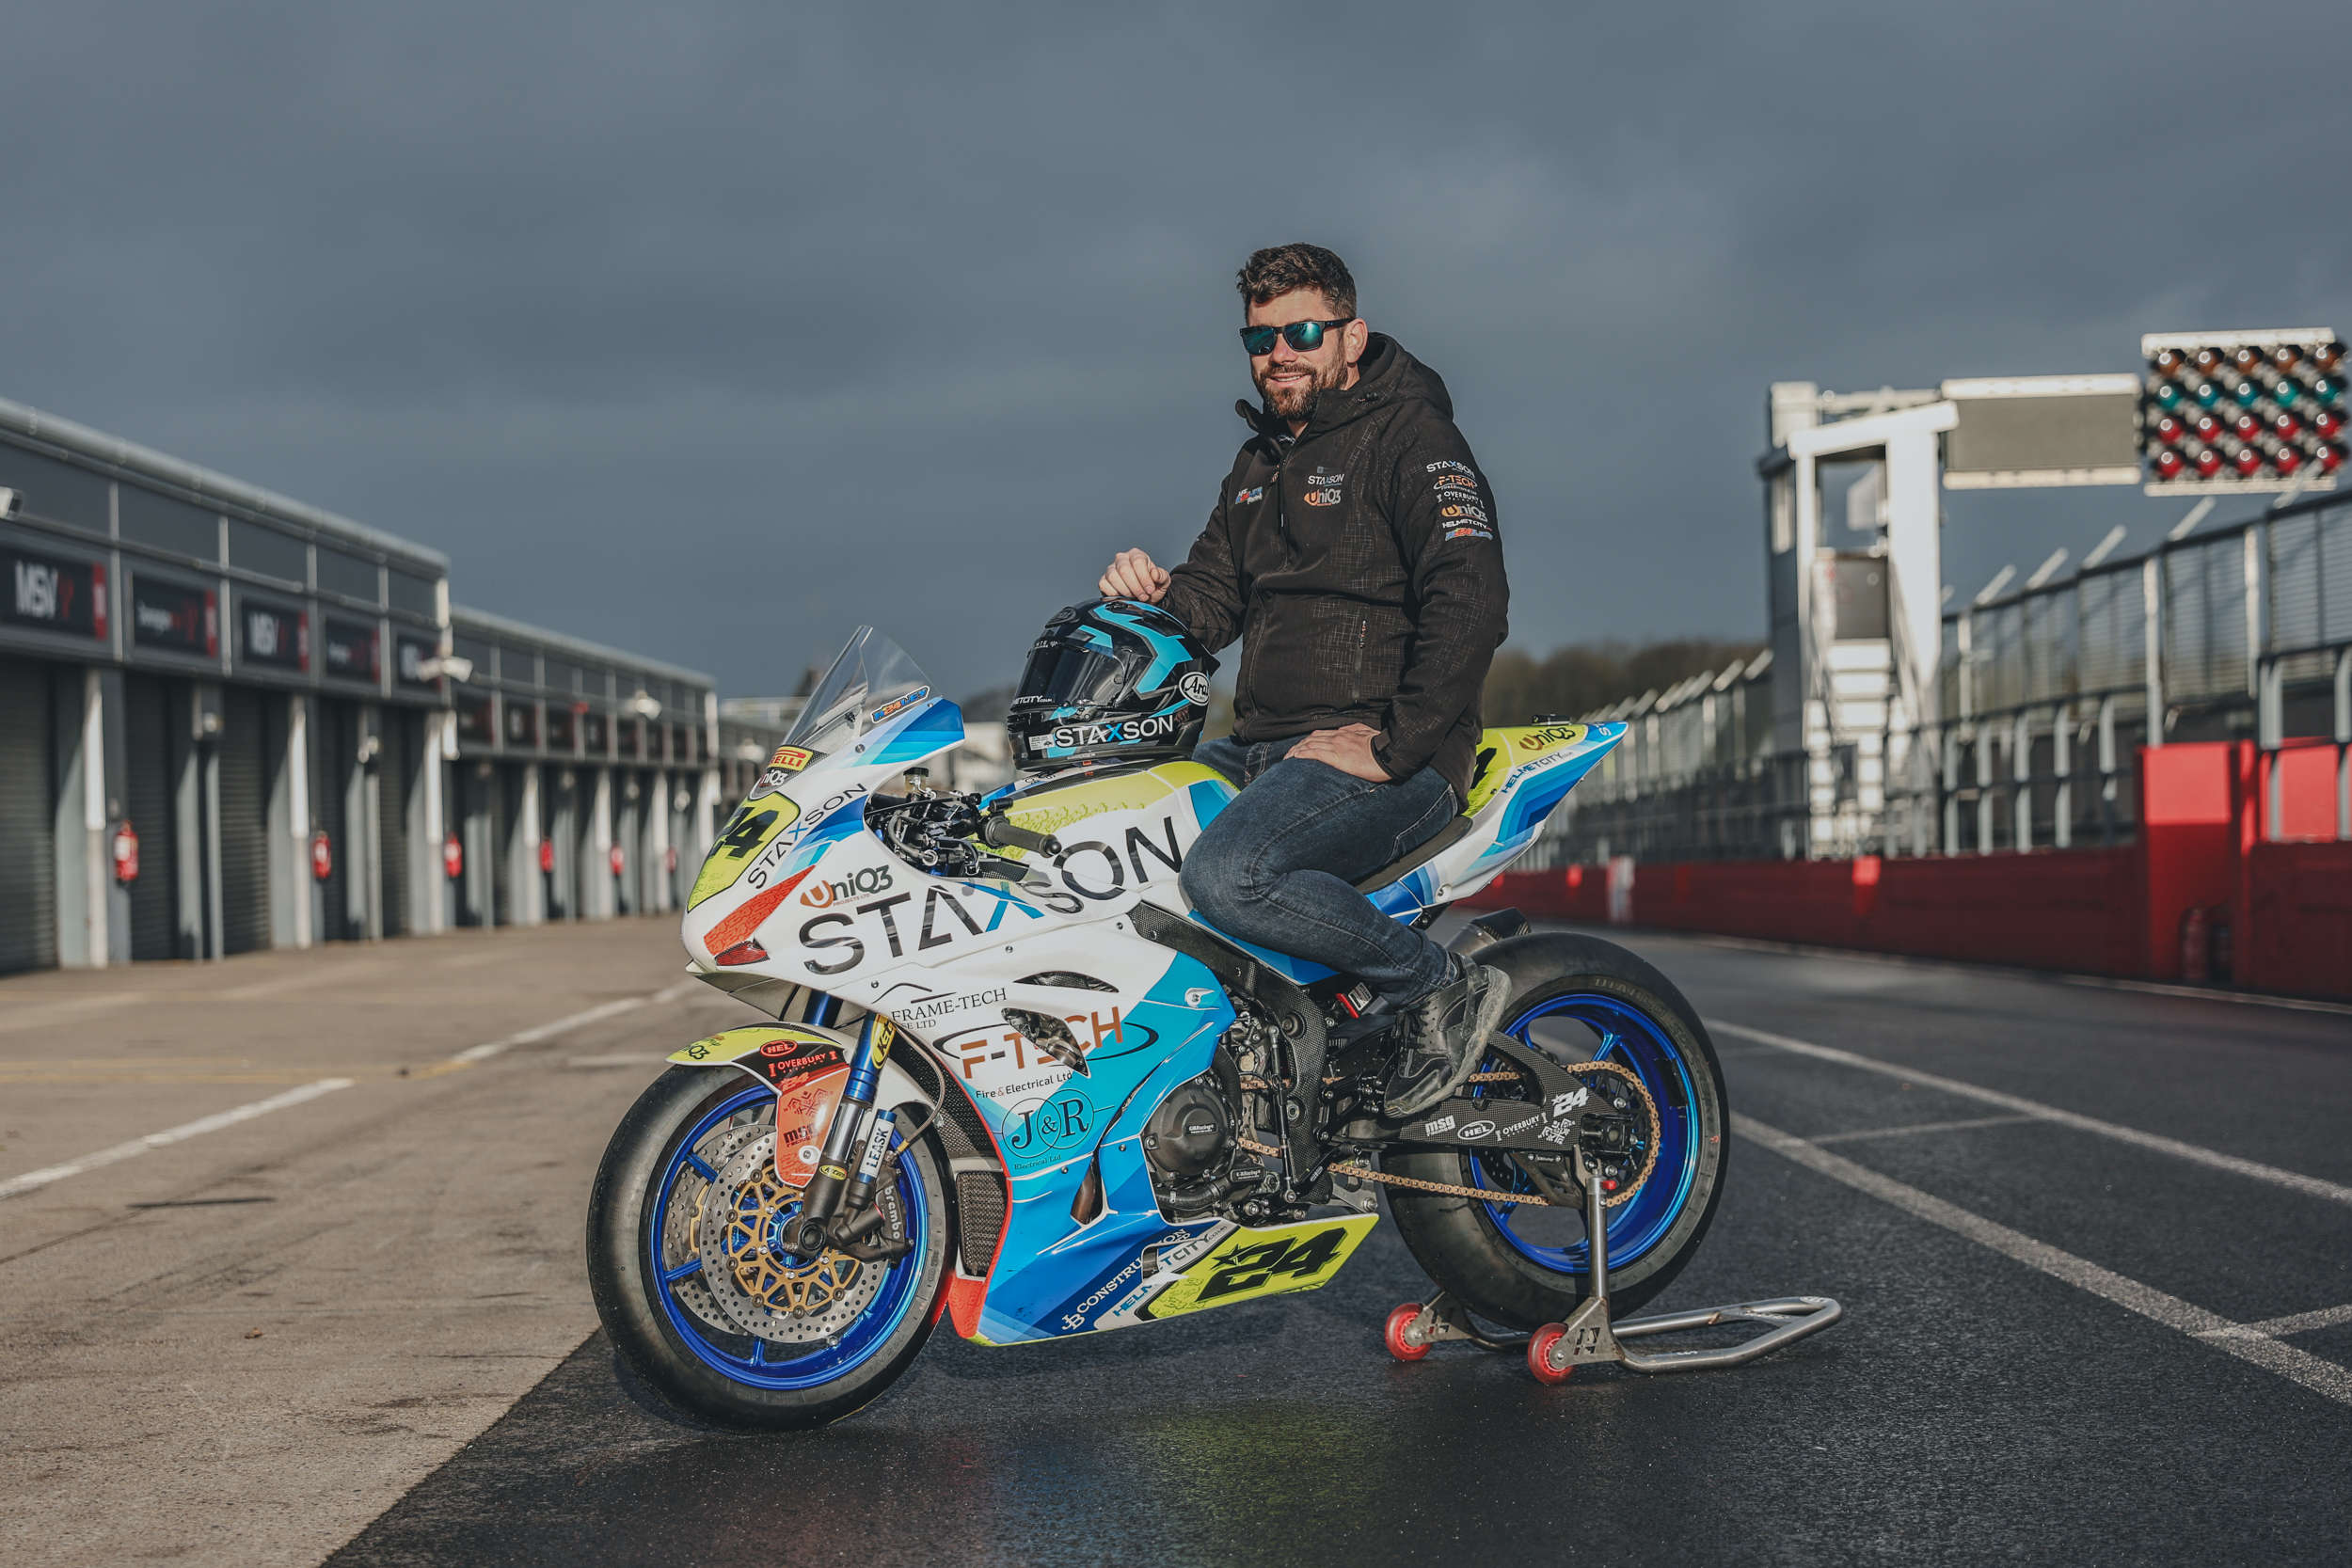  Lee Healey Makes Spectacular Debut In British Superbikes Superstock Class